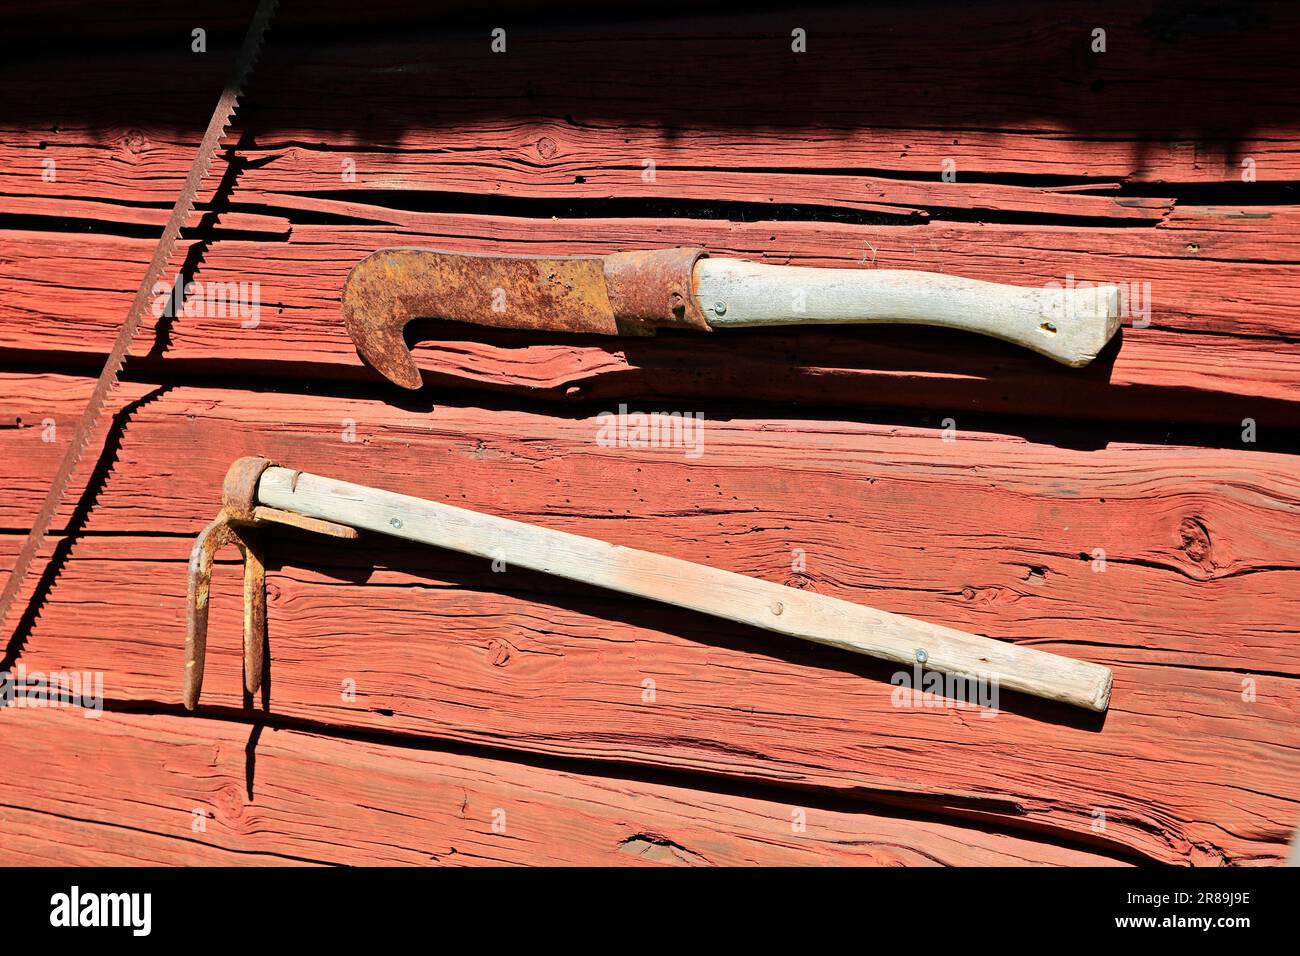 Two old agricultural hoe tools hanging on the exterior of traditional log wall painted with red ochre paint. Kreivinmaki Open-Air Museum, Salo, FI. Stock Photo